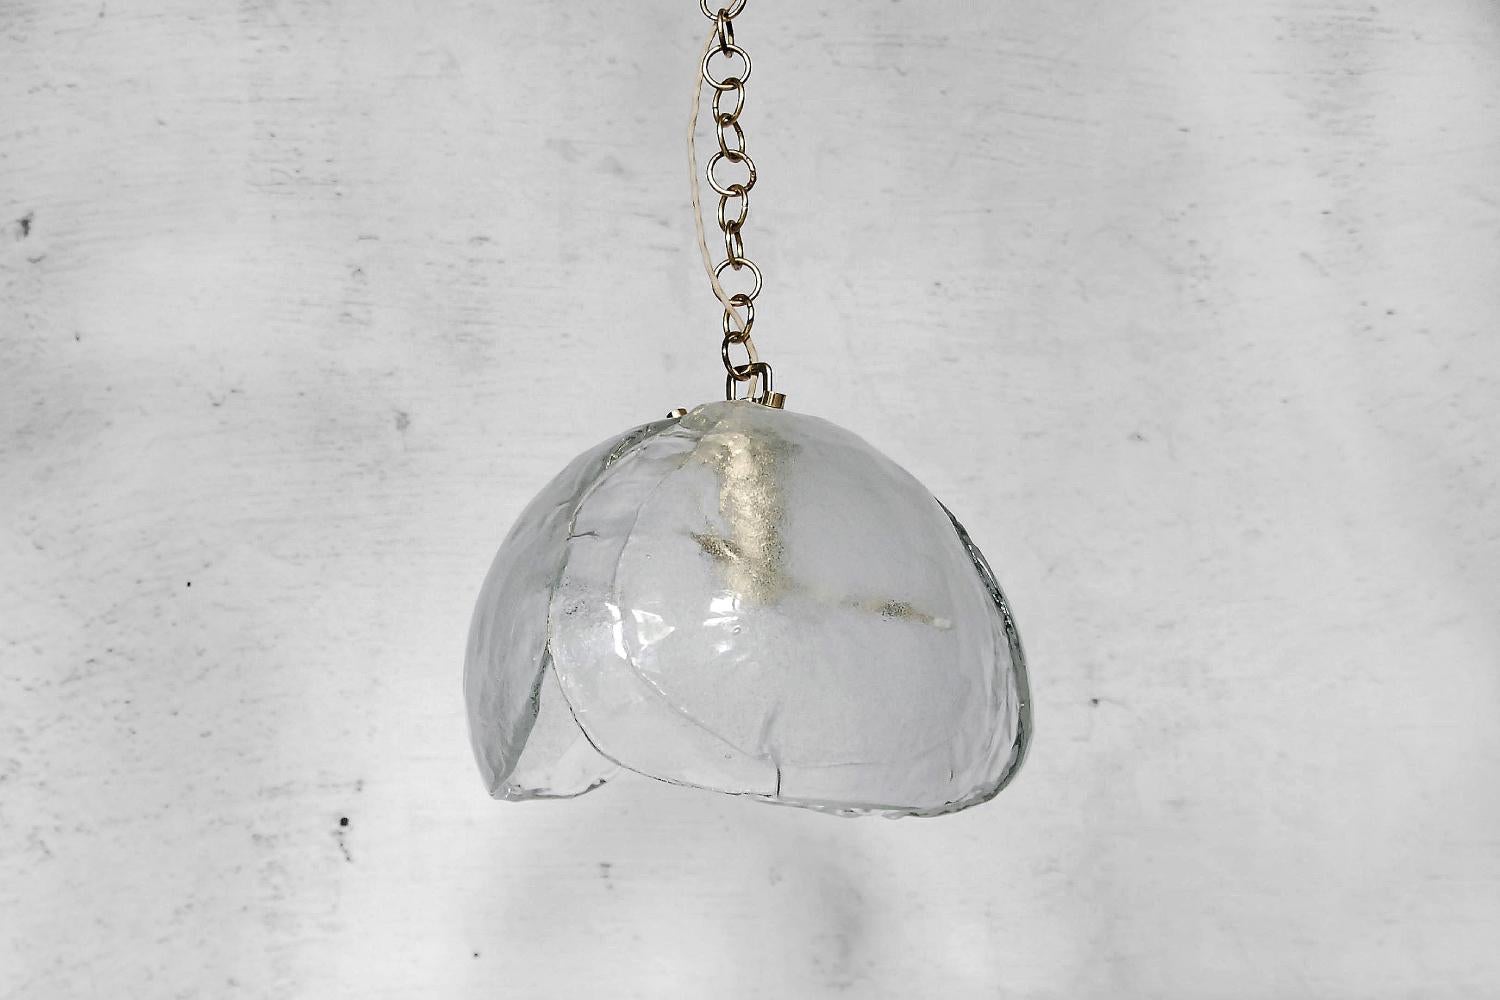 This pendant lamp was manufactured by Kaiser Leuchten during the 1960s. The shade is made from Italian Mazzega Glass from Murano. Its shape resembles the blooming flower. The shell and chain is made from brass. The lamp is large and heavy.